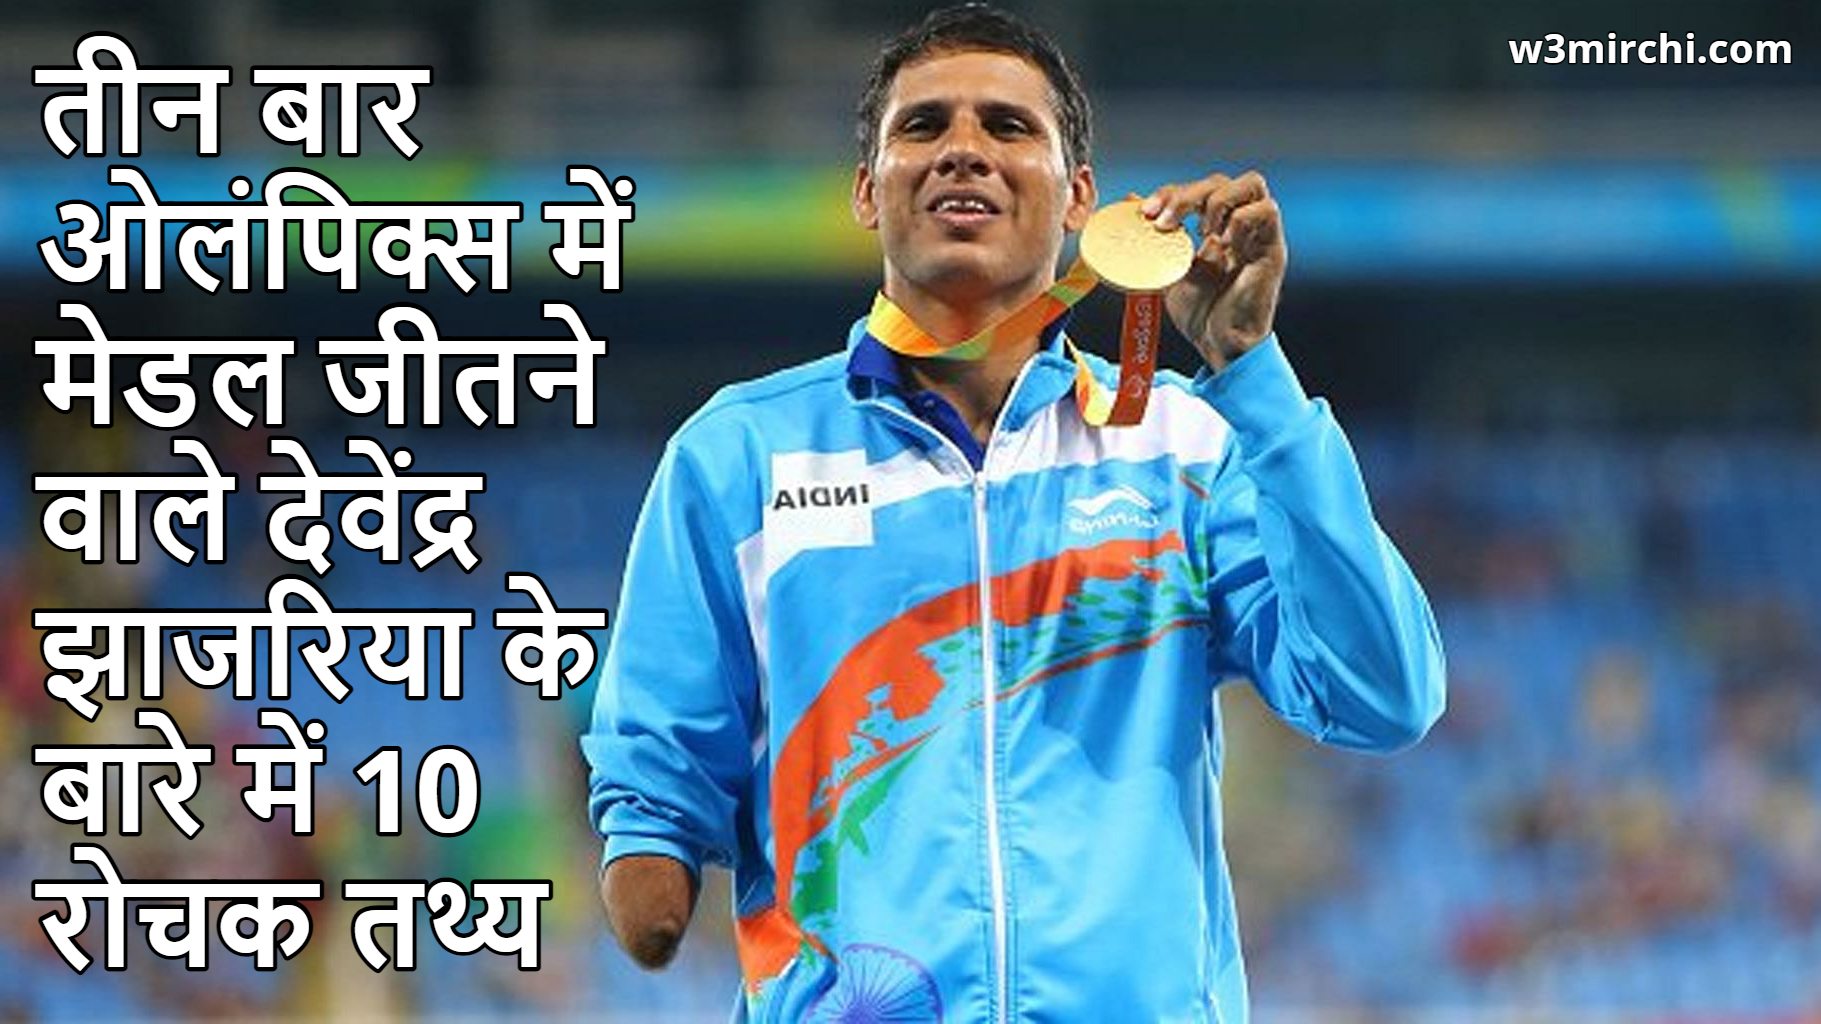 Top 10 Facts about Silver Medalist Devendra Jhajharia